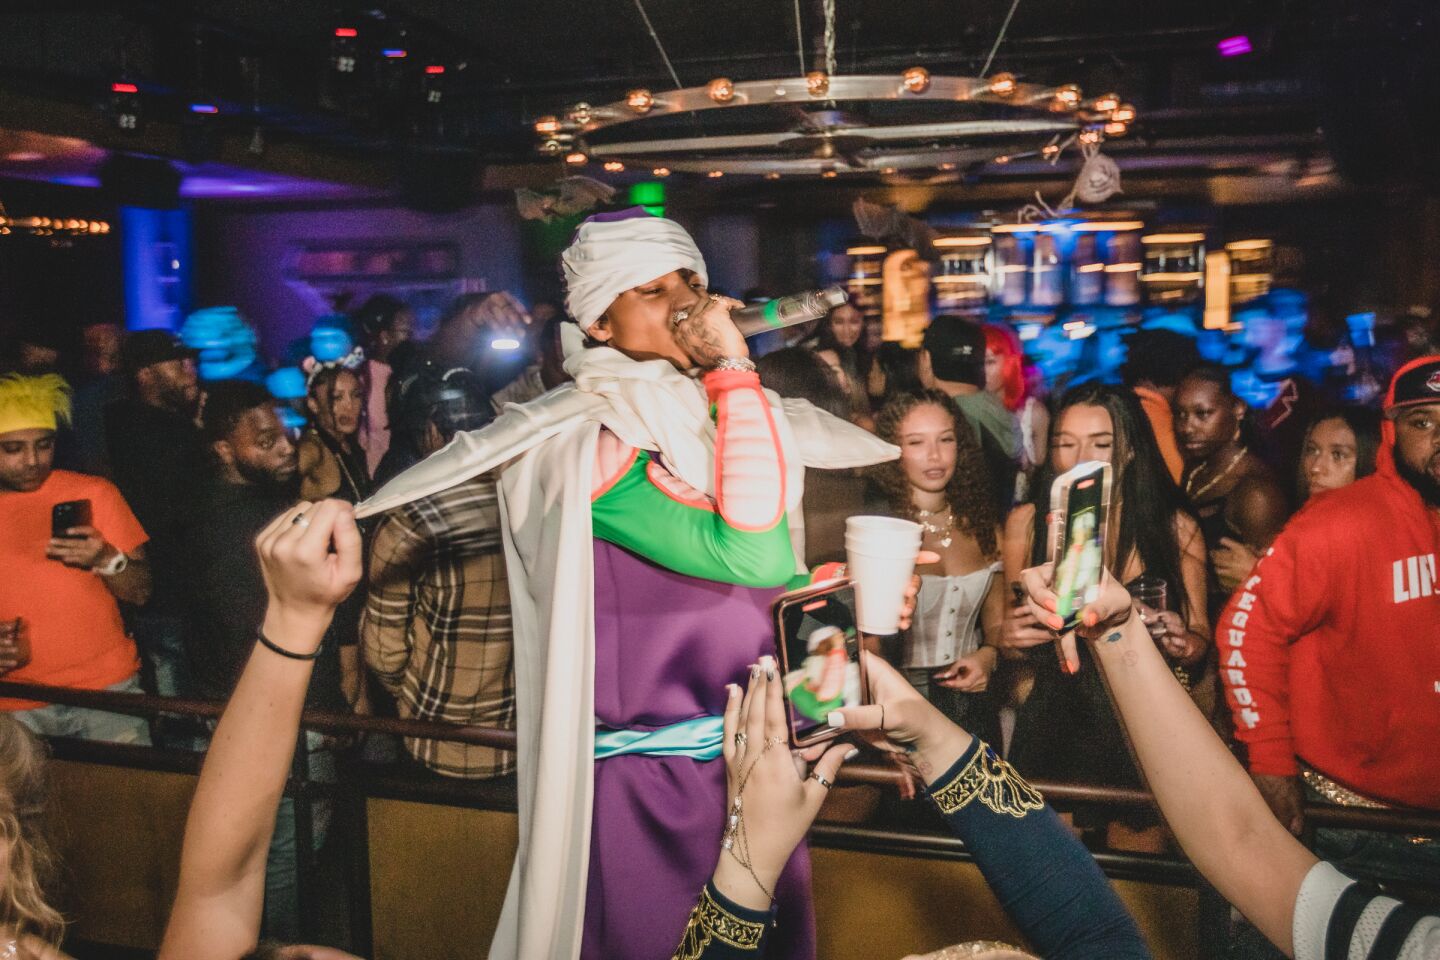 Grammy-nominated rapper Swae Lee put on a show for the crowd at Oxford Social Club on Halloween night, Oct. 31, 2021.